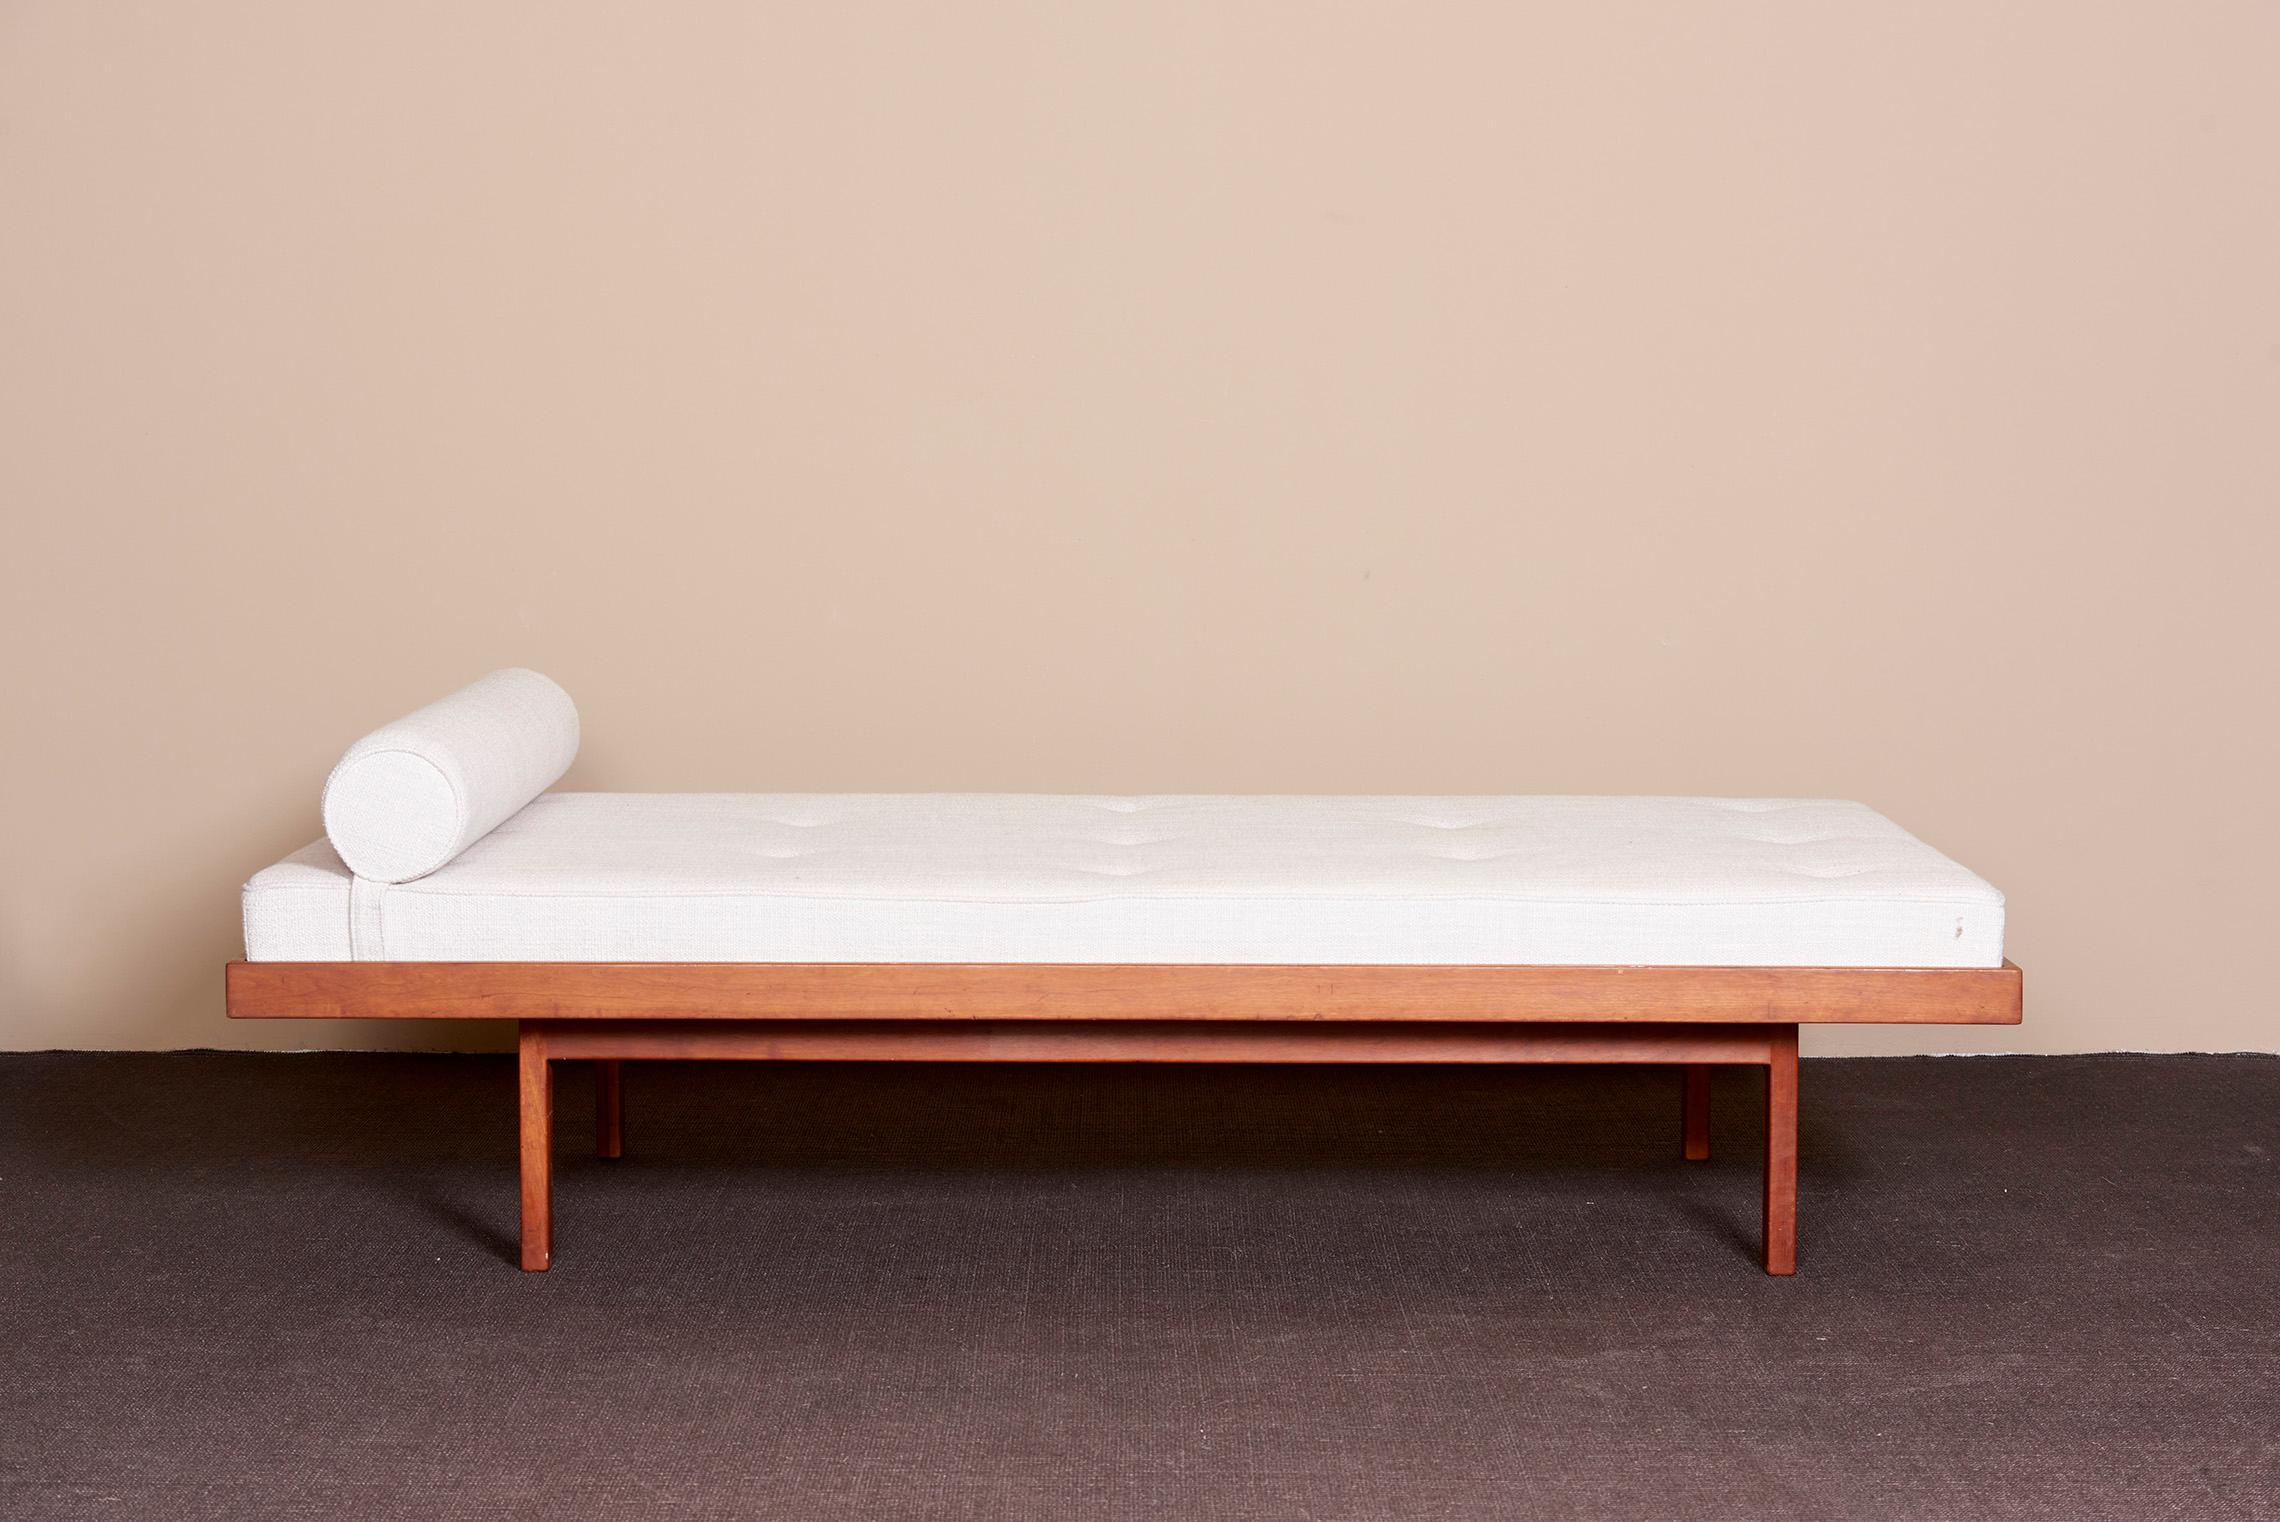 1 of 2 american studio walnut frame daybeds in Mark Alexander fabric, US 1960s.